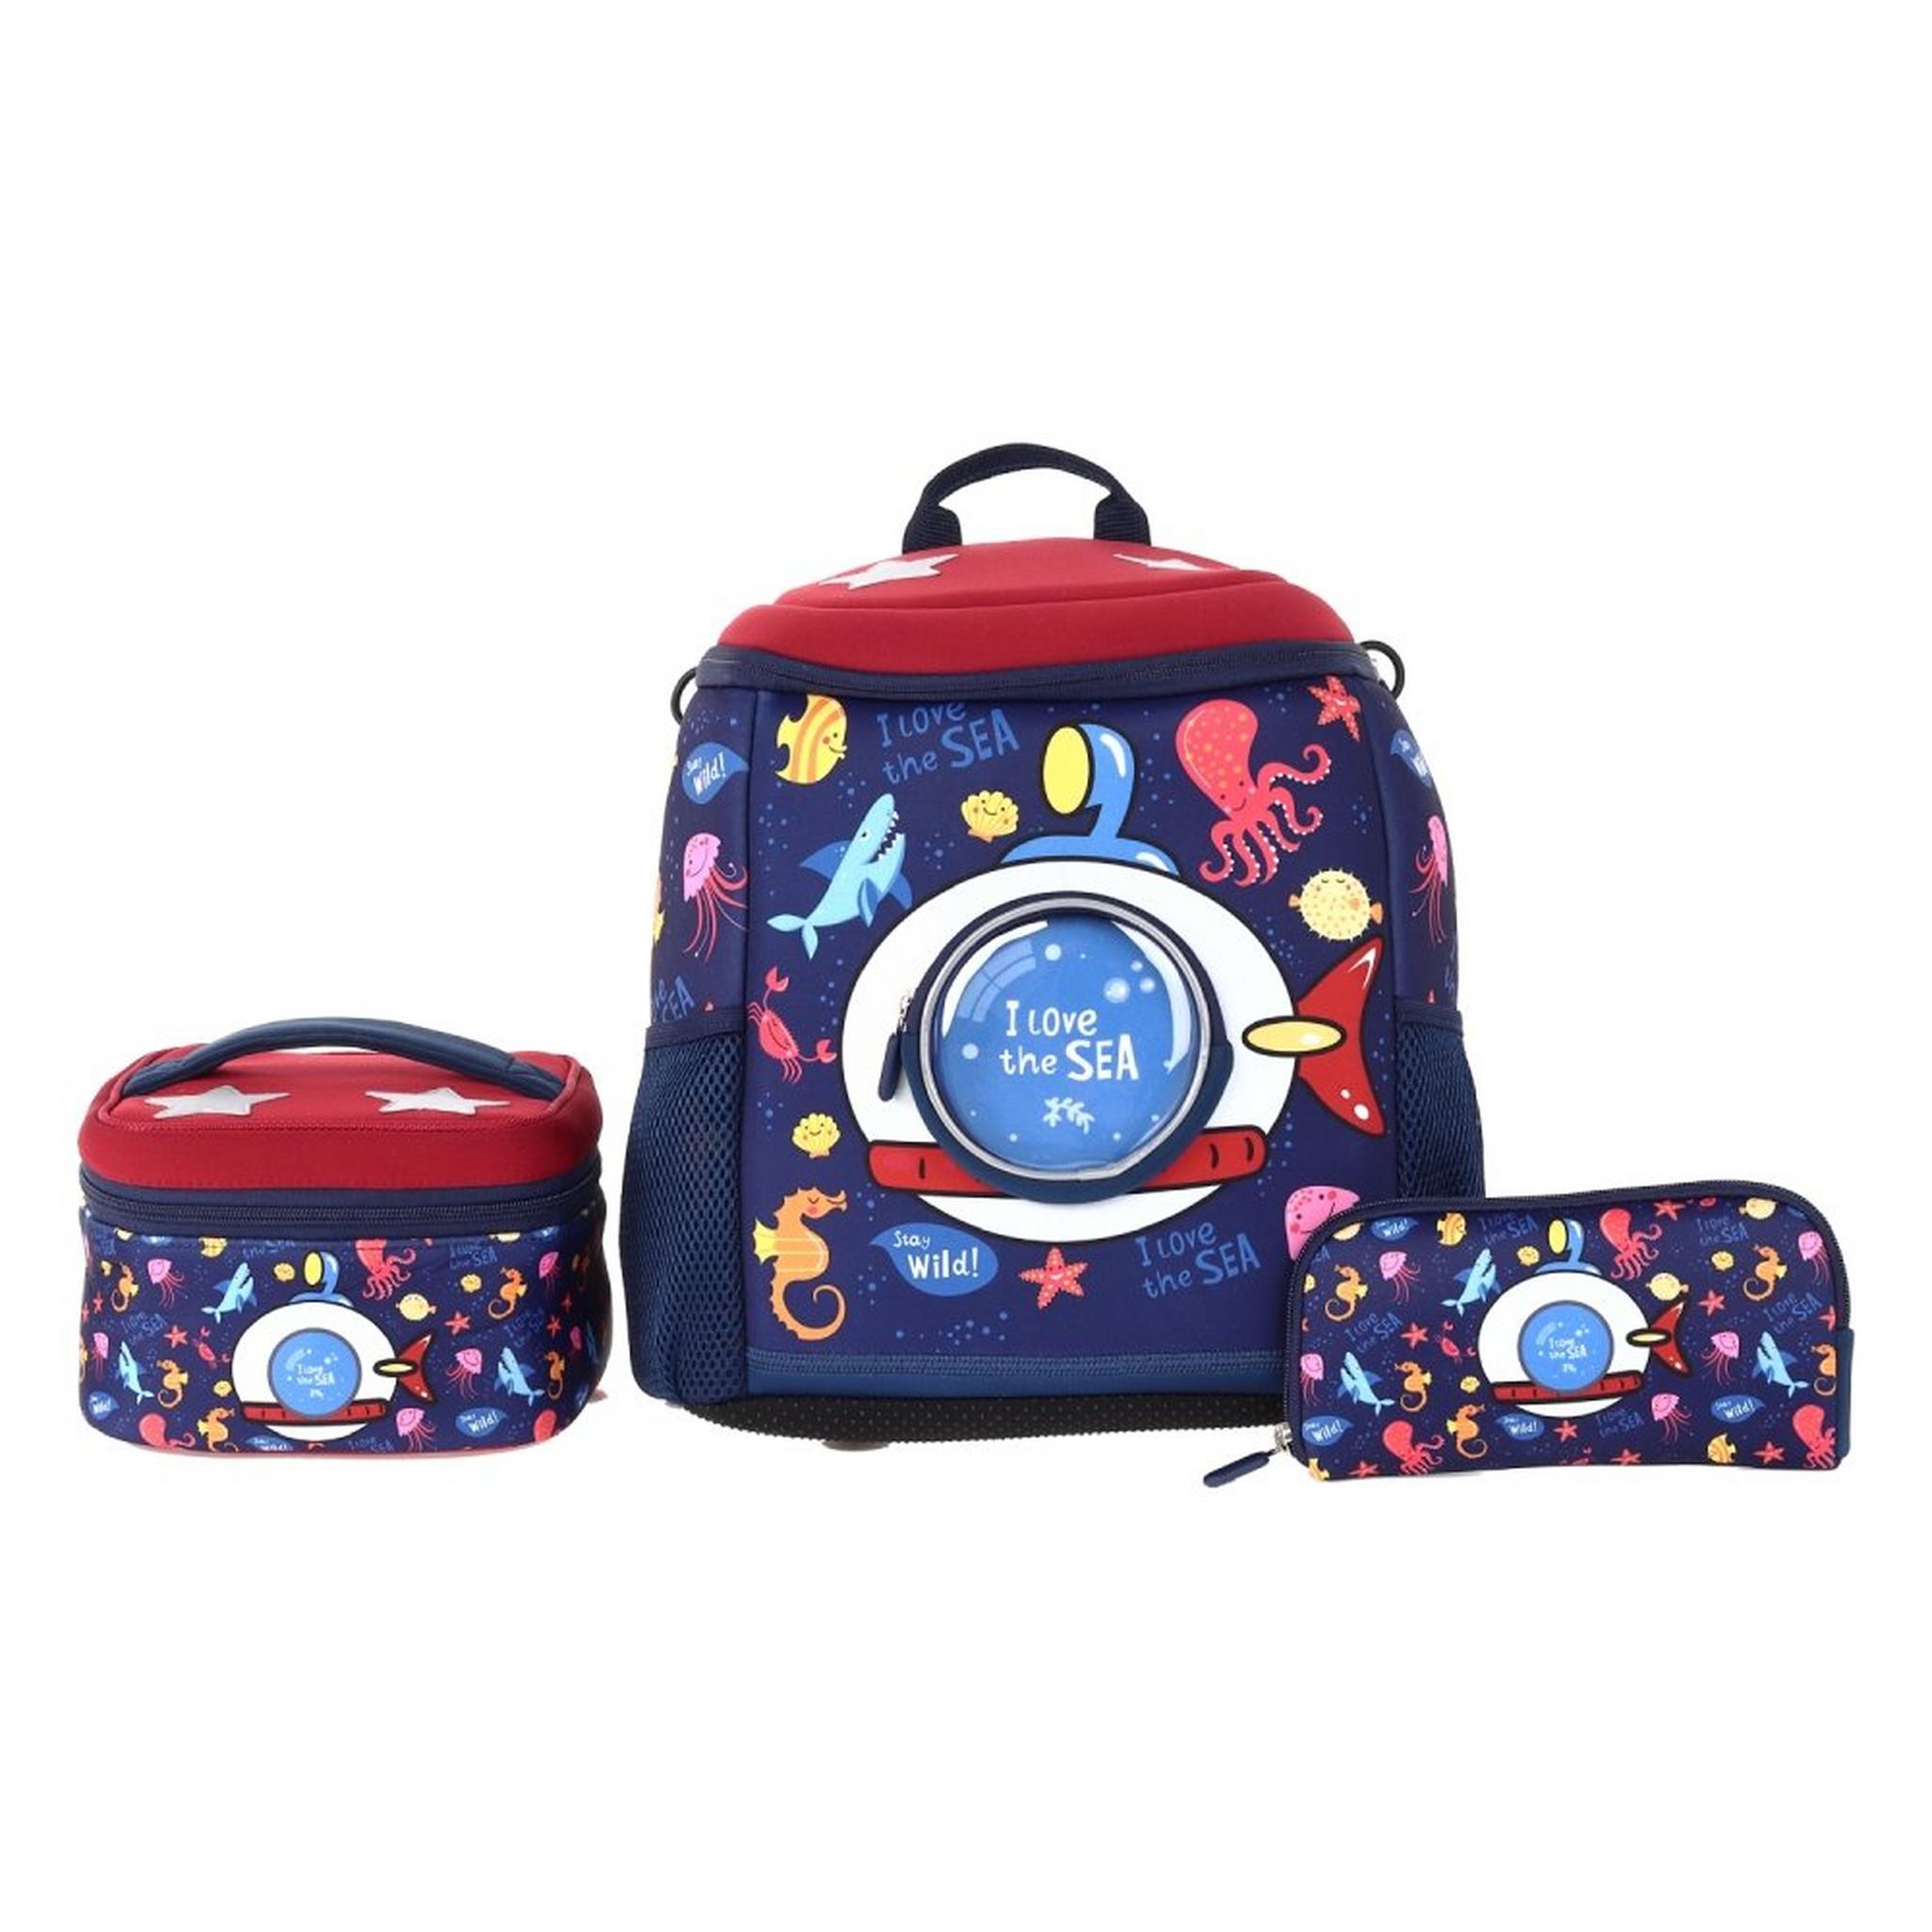 EQ Kids 3in1 Sea Large Backpack - Blue/Red